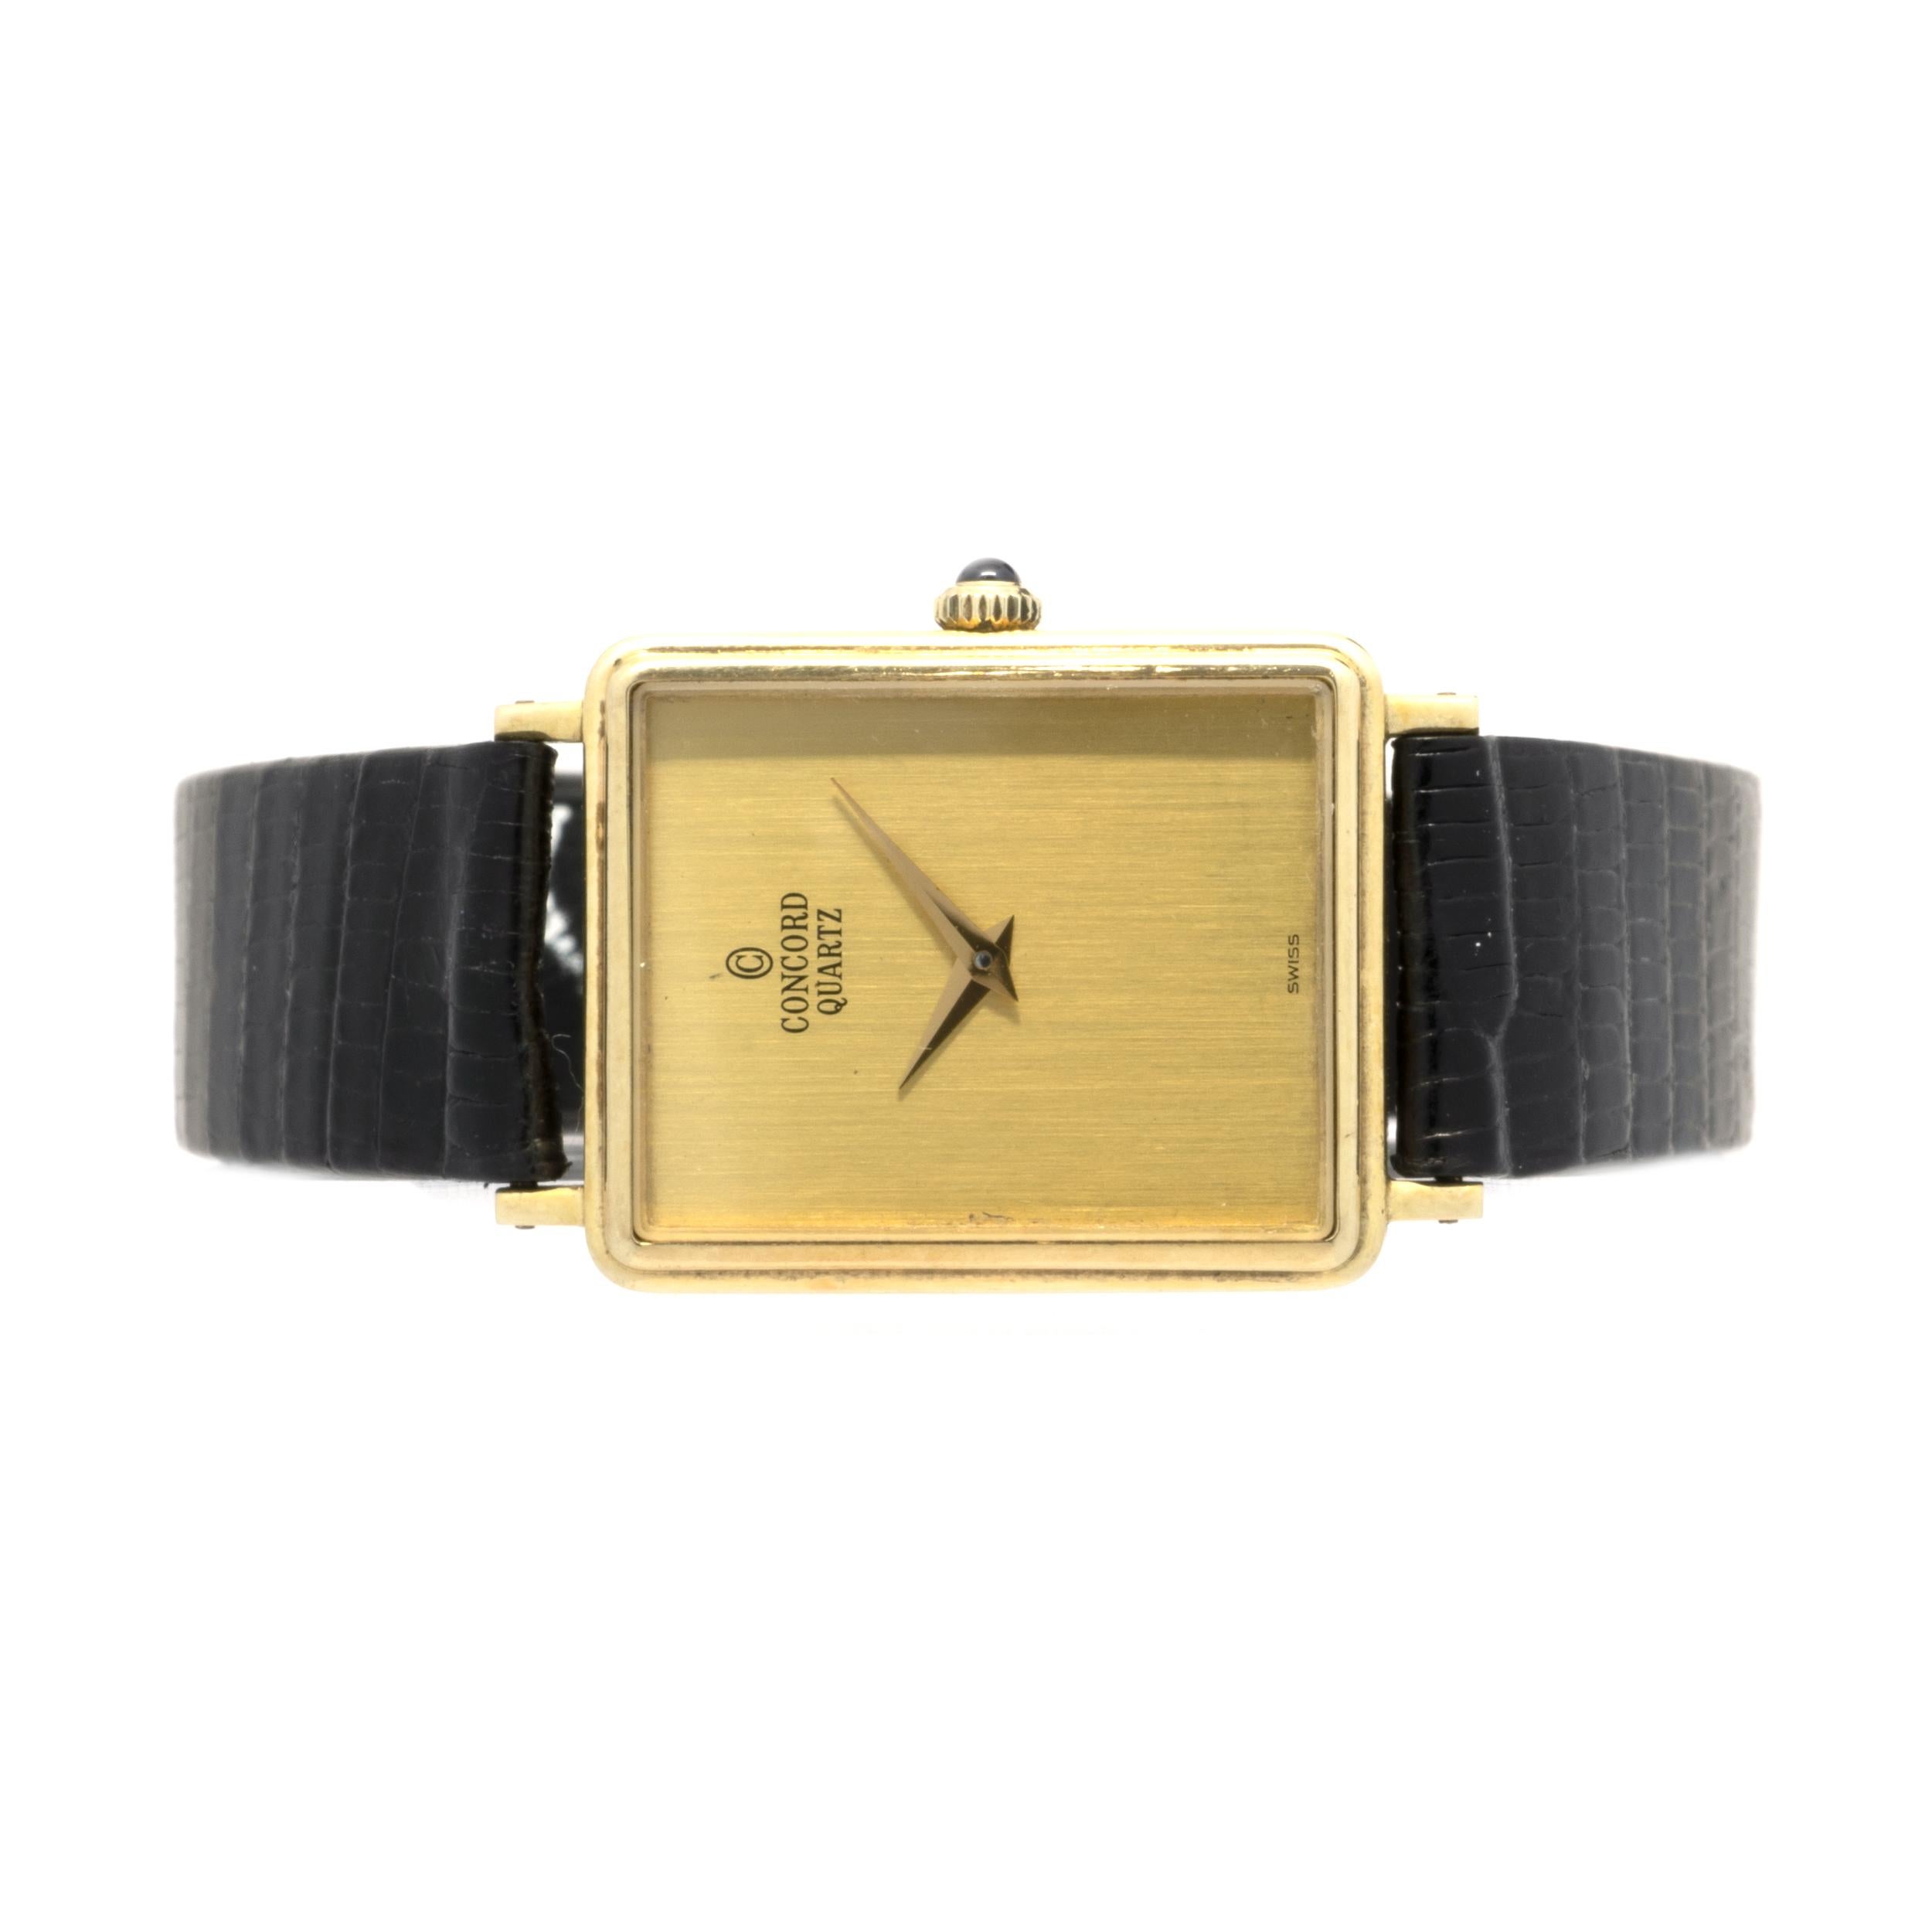 Movement: quartz
Function: hours, minutes
Case: 29 X 23mm 14K yellow gold rectangular case, sapphire crystal, pull/push crown, water resistant
Dial: champagne dial
Band: black lizard strap with buckle
Serial#: 2098XXX 365XXX


No box or papers